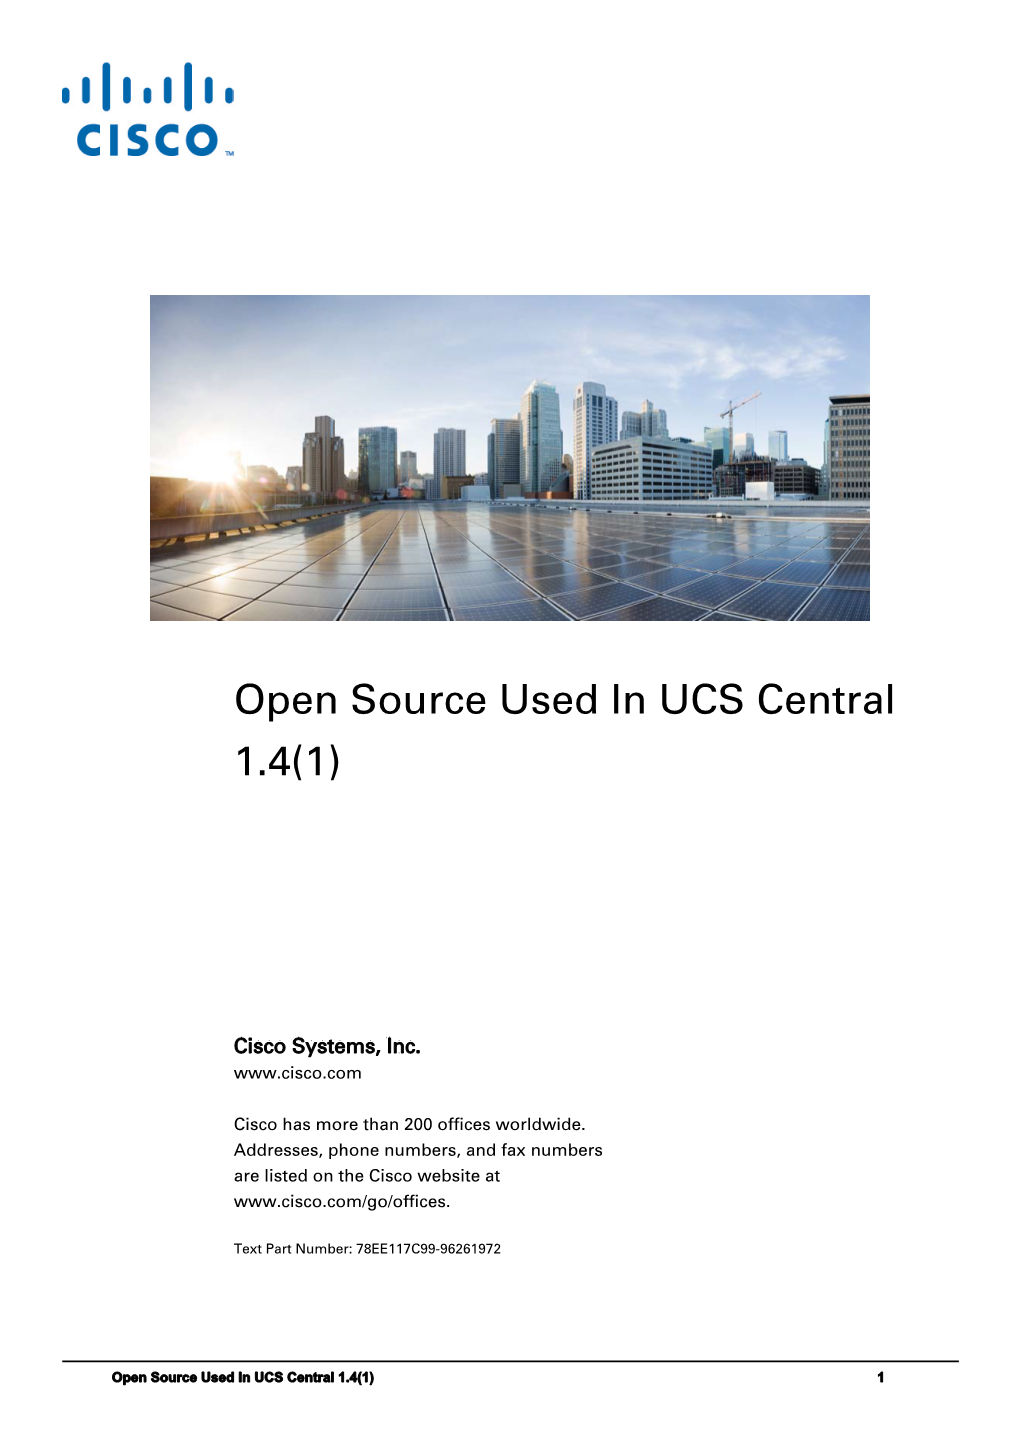 Open Source Used in Cisco UCS Central 1.4(1)